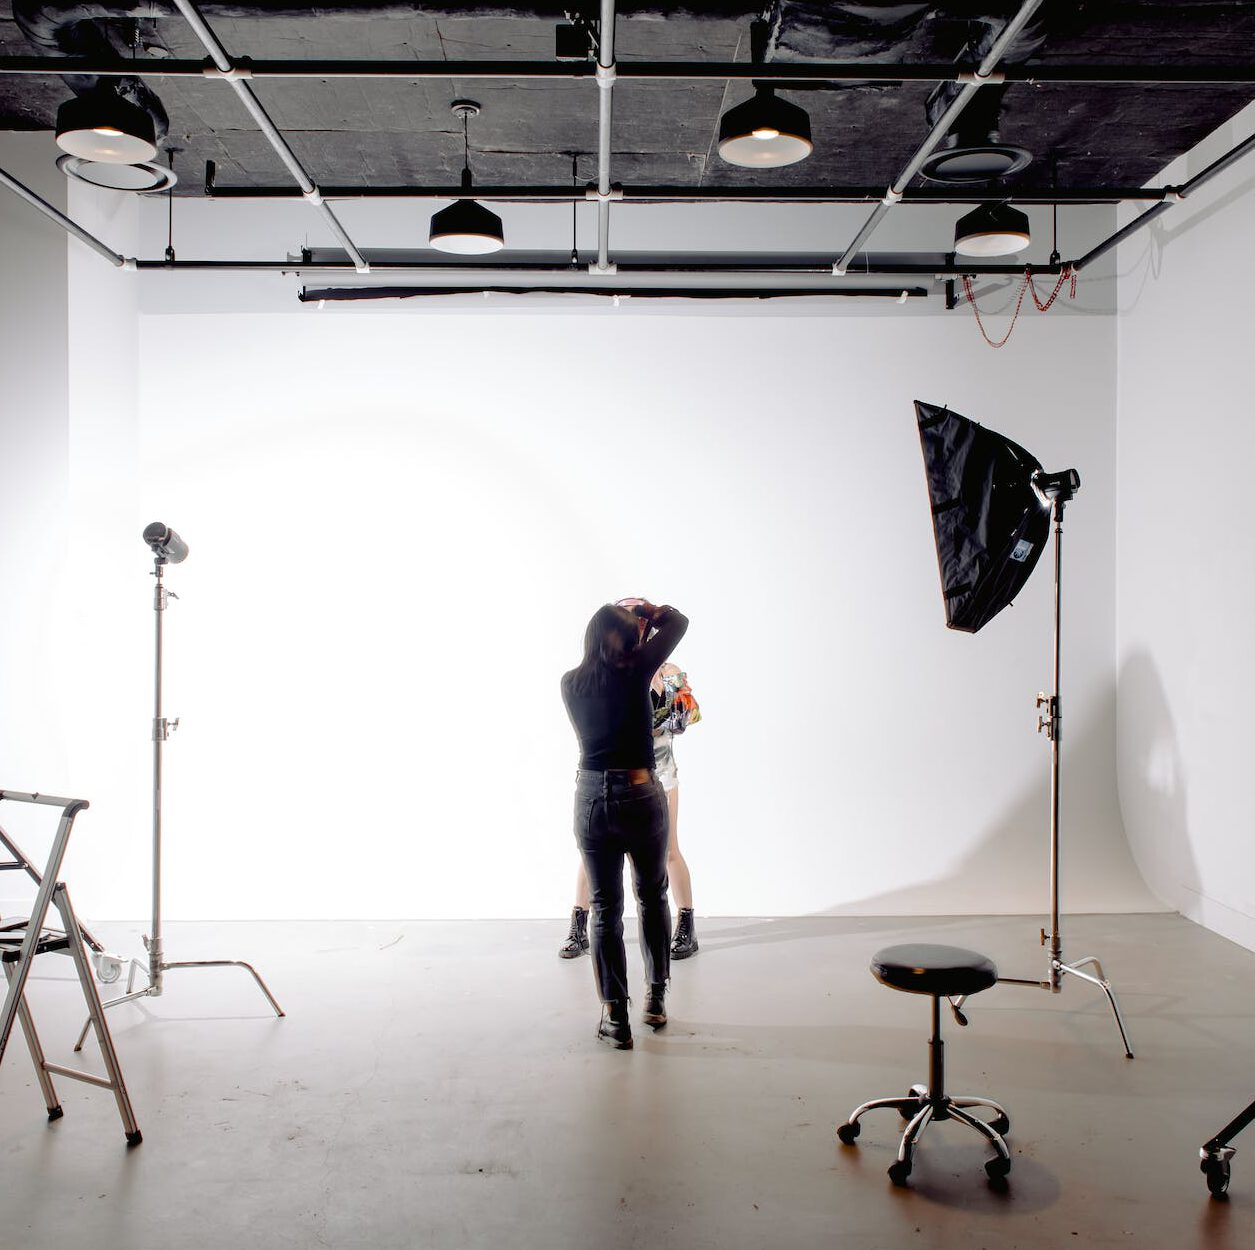 professional photographer during photo shoot in studio